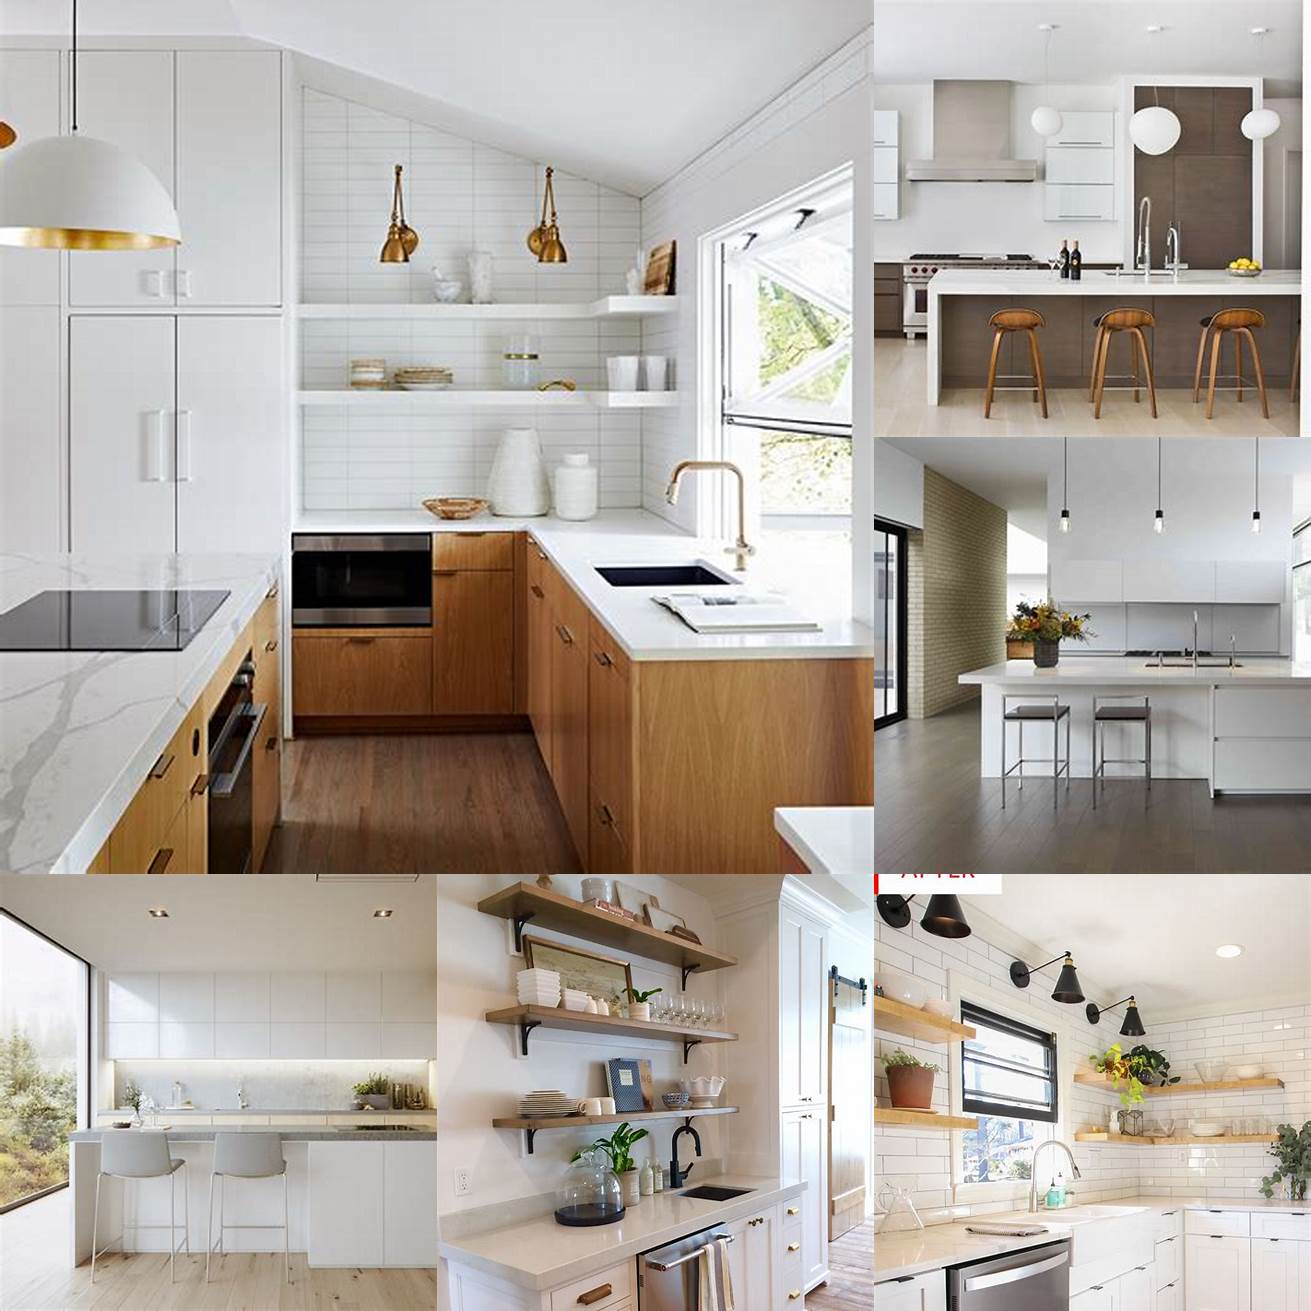 Minimalist white kitchen with sleek cabinetry and open shelving